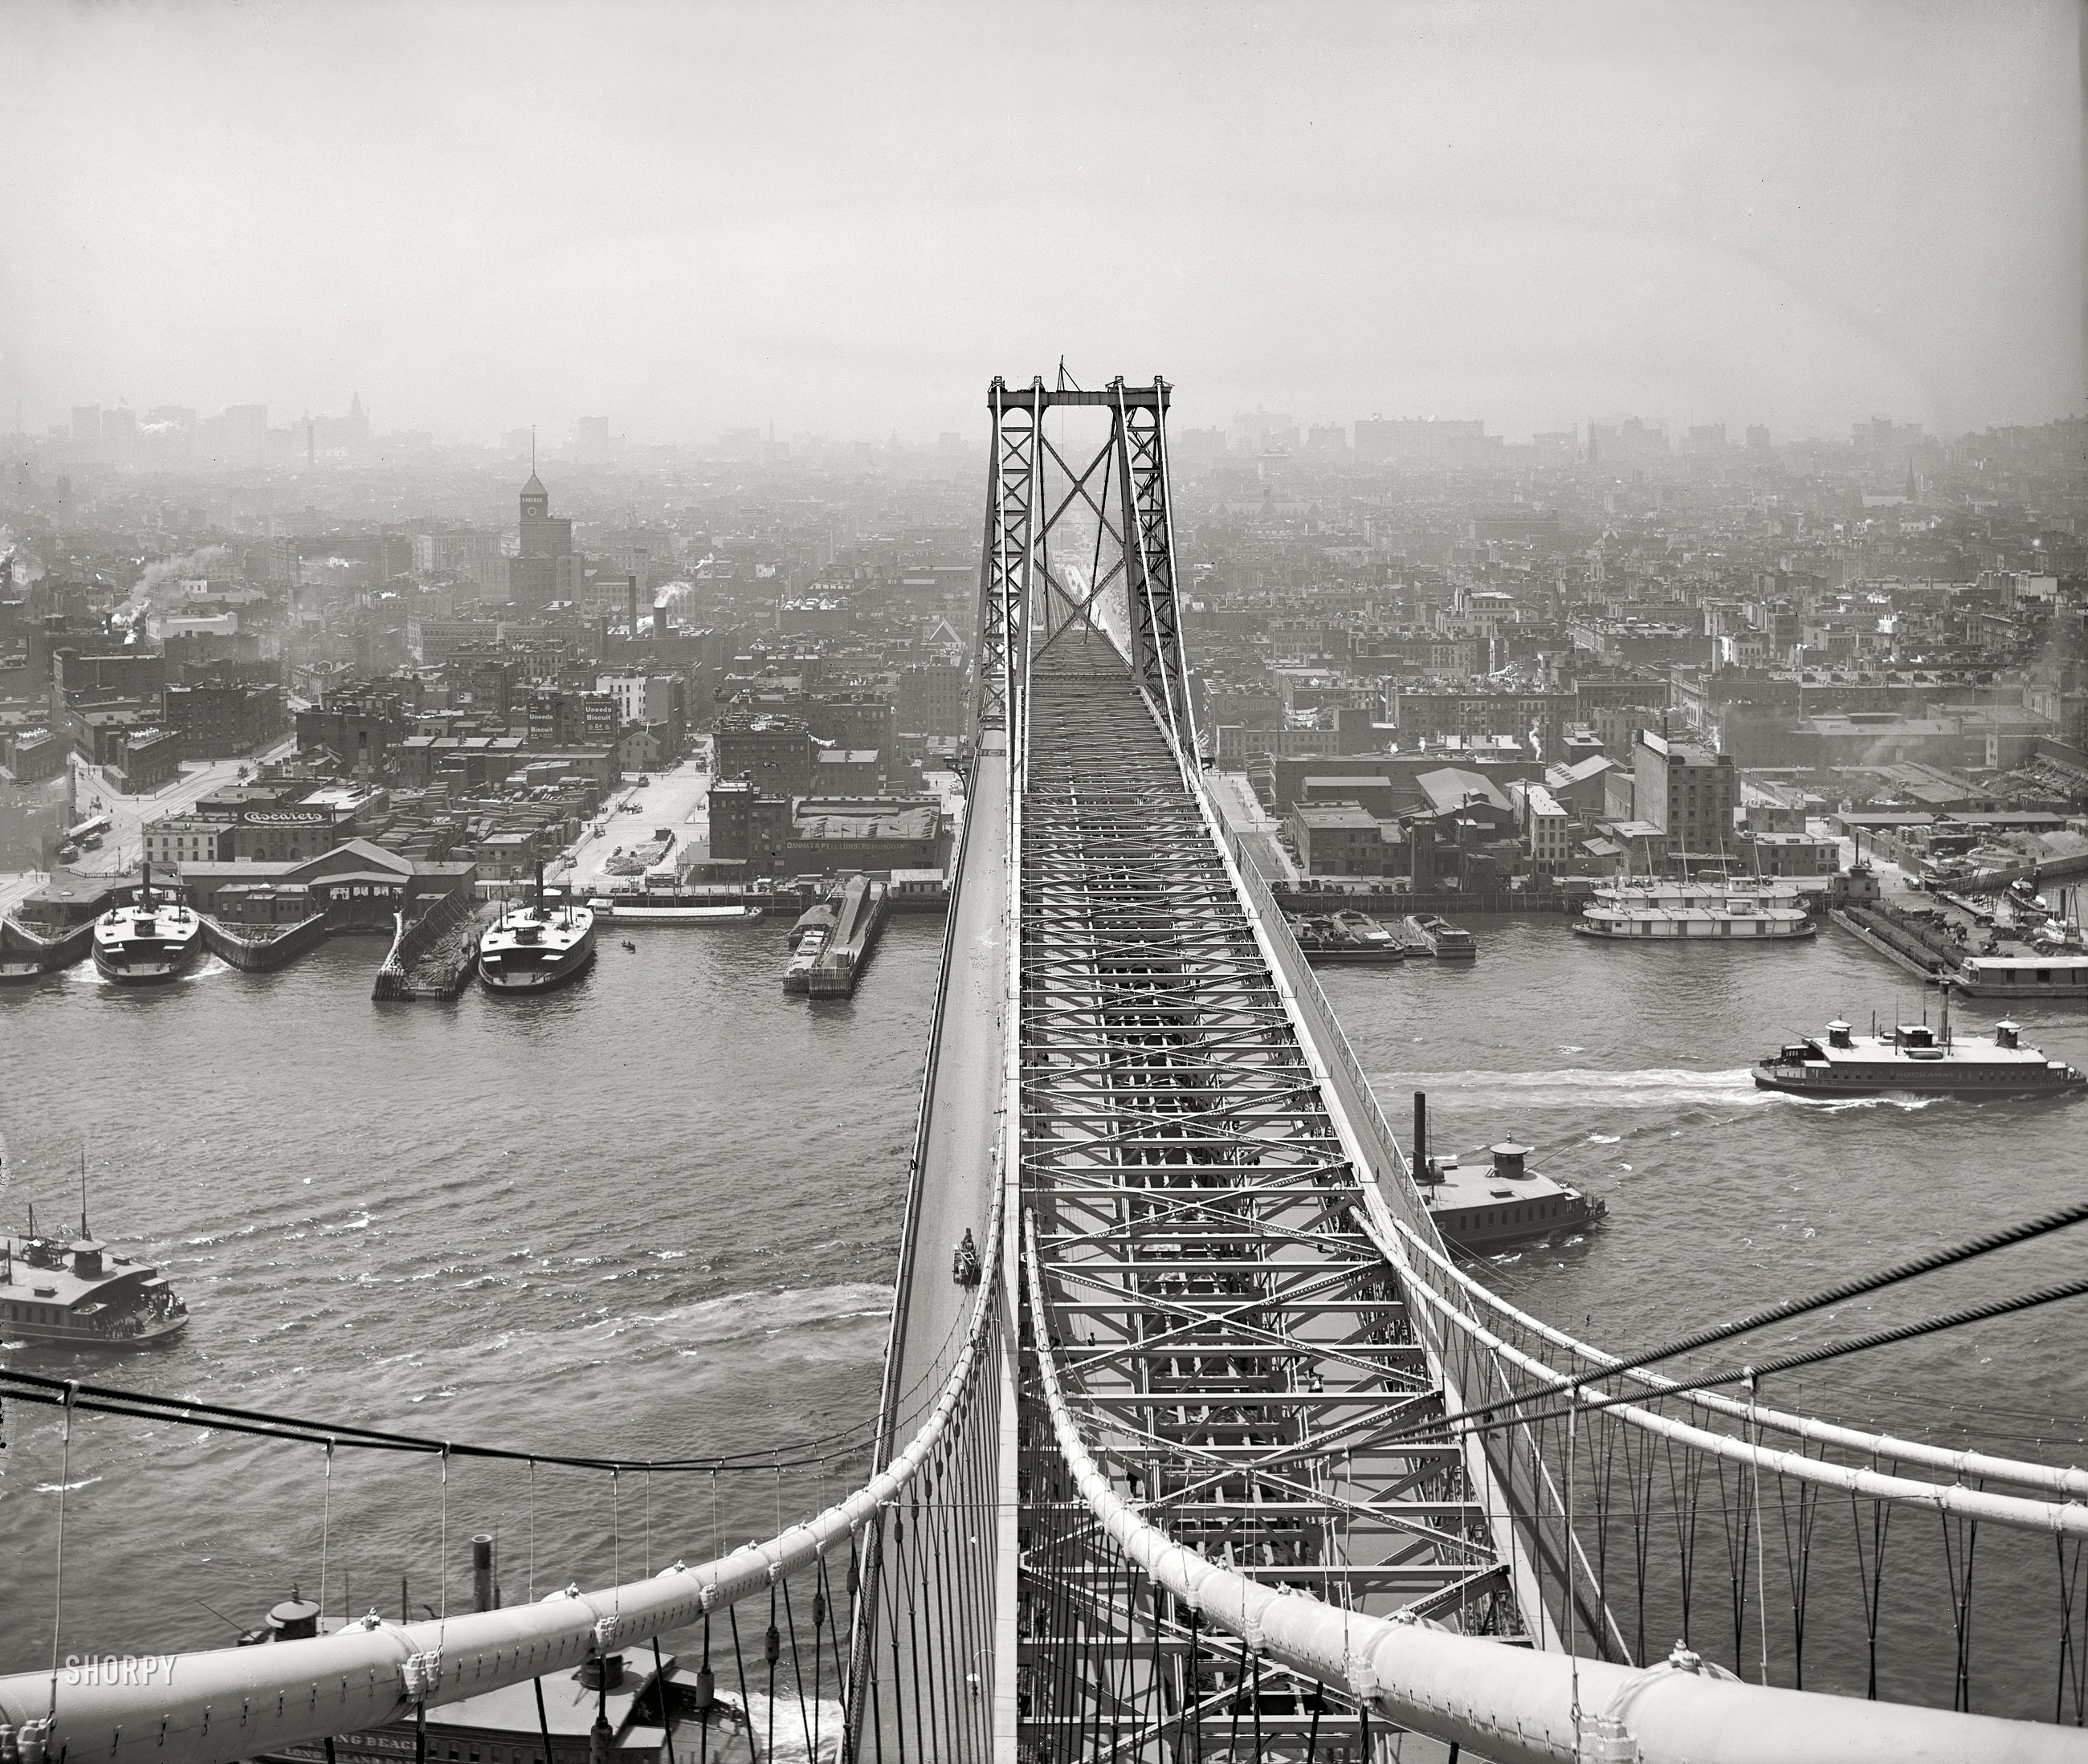 New York circa 1903. "East River from Brooklyn tower of Williamsburg Bridge." 8x10 inch dry plate glass negative, Detroit Publishing Company. View full size.